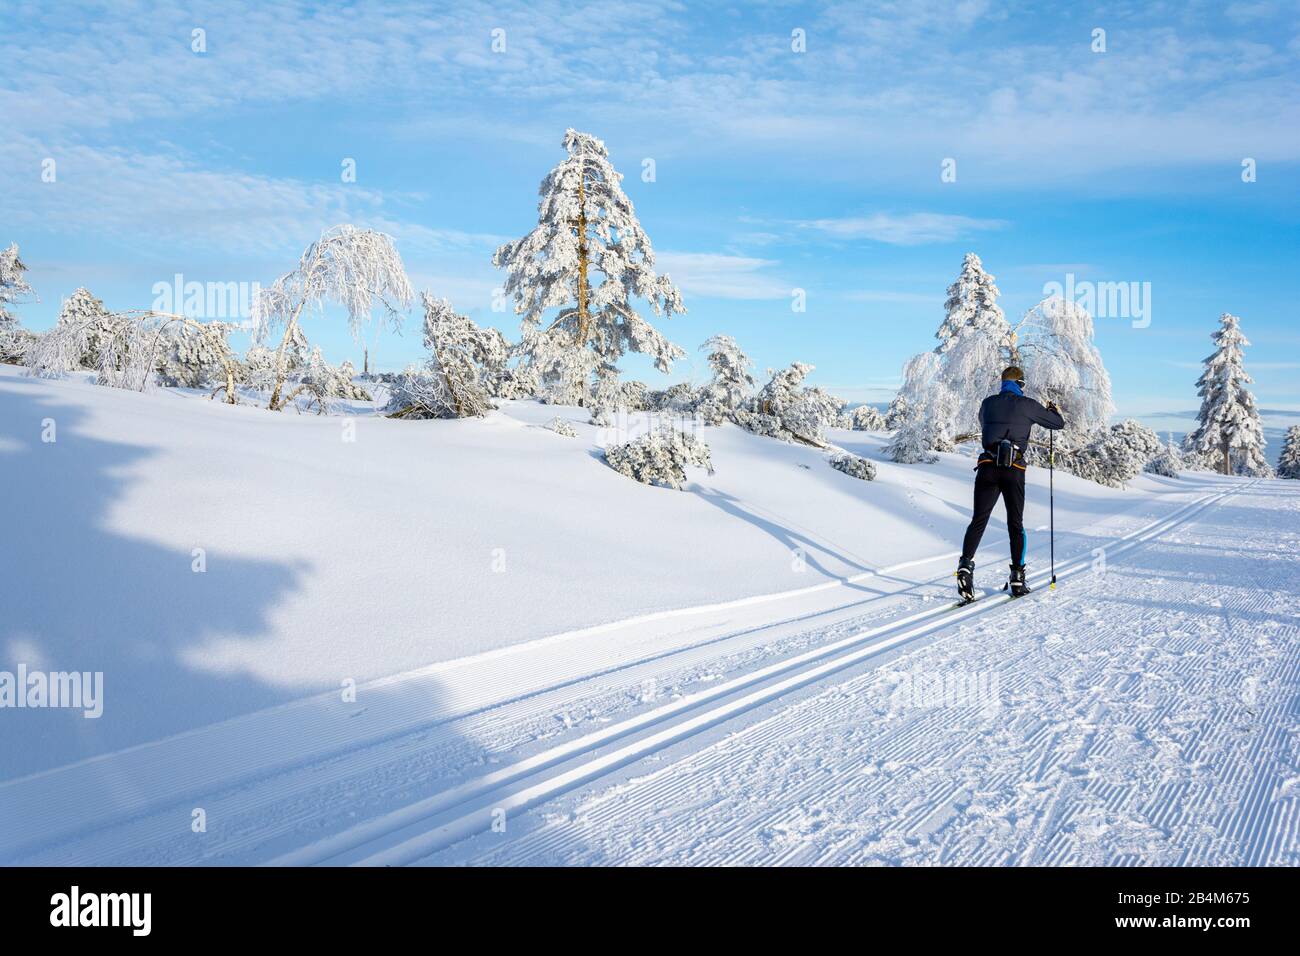 Germany, Baden-Württemberg, Black Forest, winter in the national park. Stock Photo